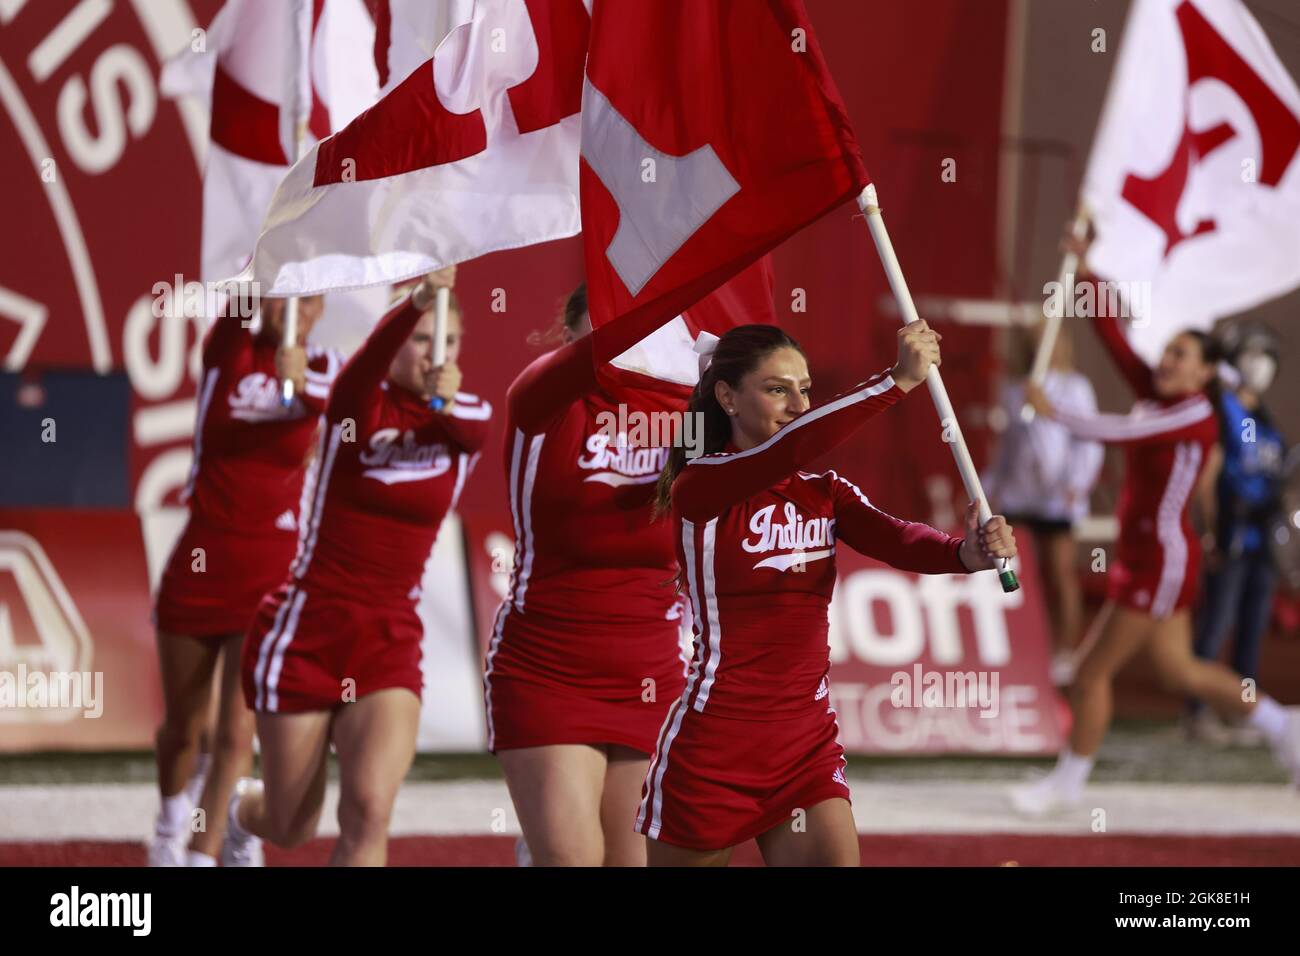 BLOOMINGTON, UNITED STATES - 2021/09/11: Indiana University cheerleaders carry flags after IU scores against Idaho during an NCAA football game on September 11, 2021 at Memorial Stadium in Bloomington, Ind. The Hoosiers beat the Vandals 56-14. Stock Photo